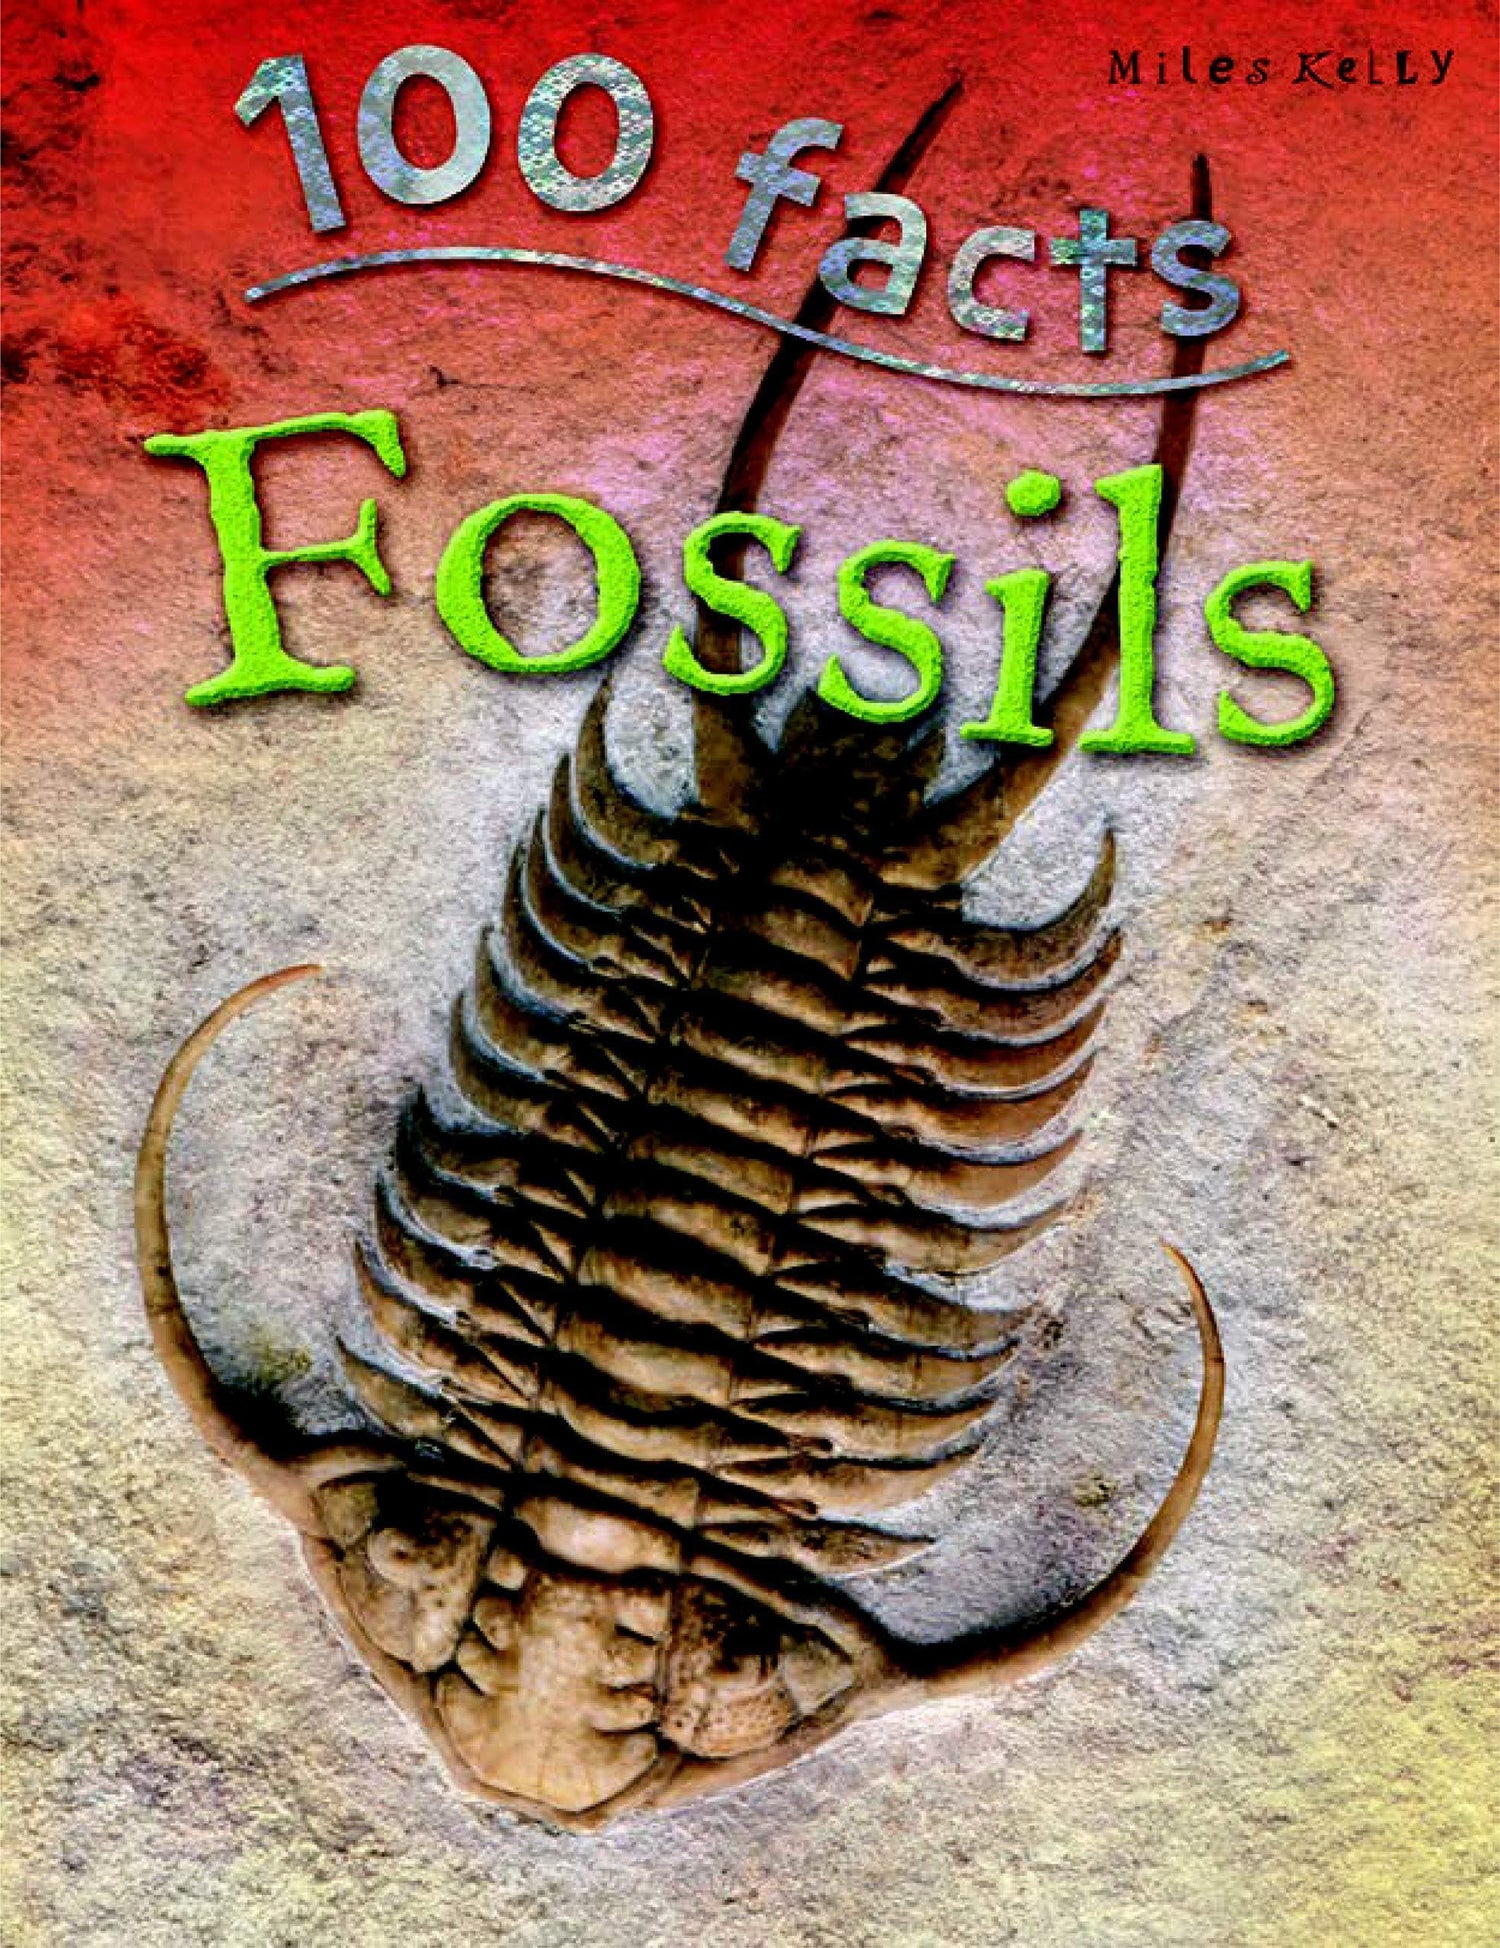 100 FACTS FOSSILS